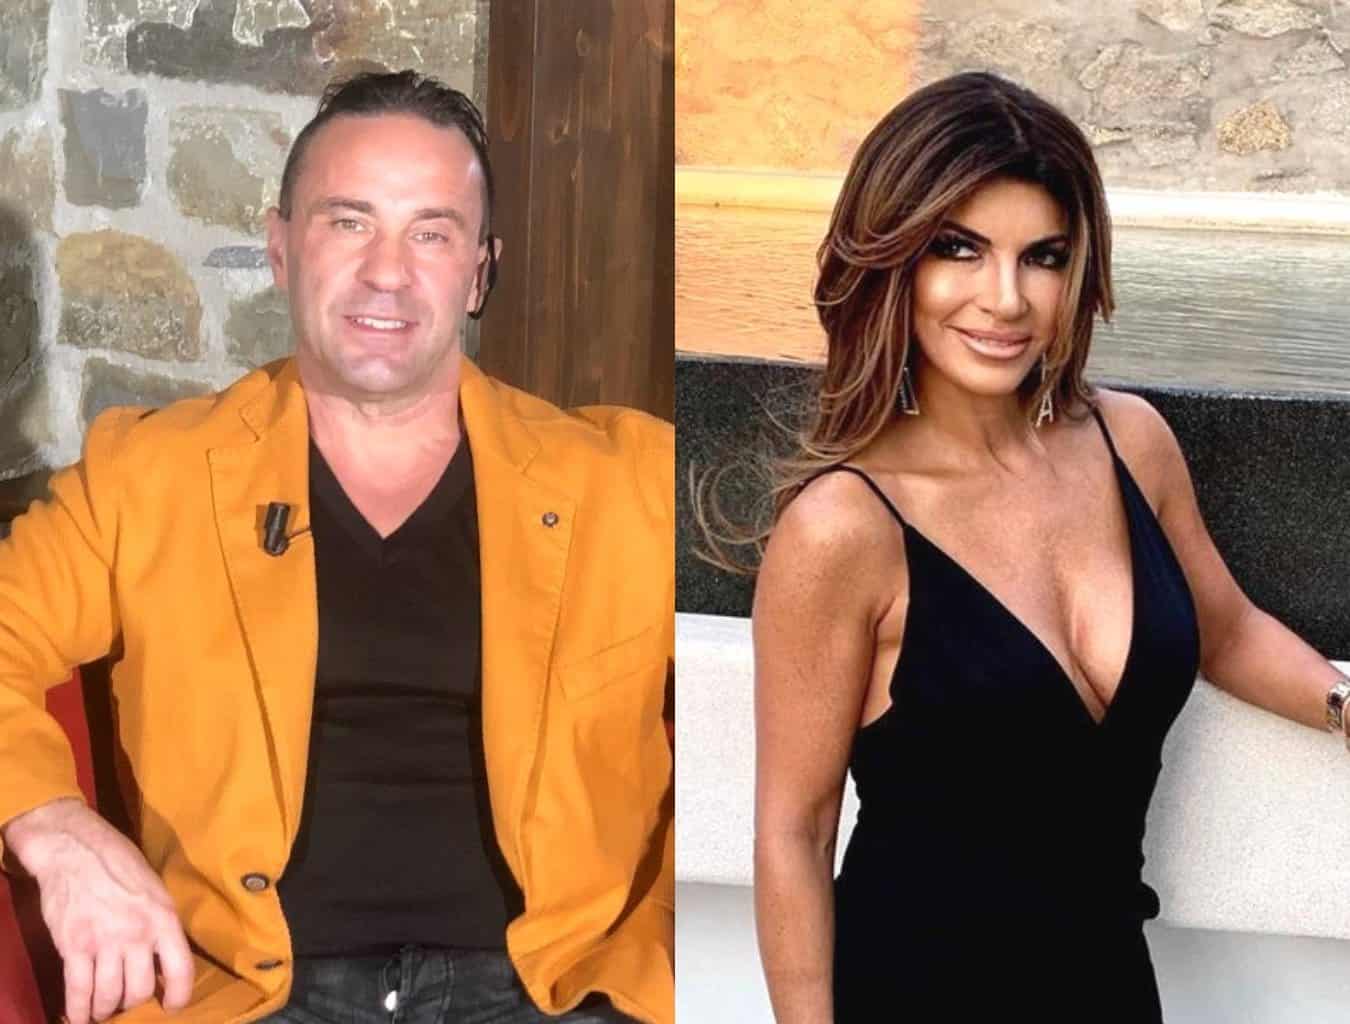 Joe Giudice Reveals What Wasn't Shown During His Reunion With Teresa in Italy, Claims He Was Edited as a Villain on the RHONJ